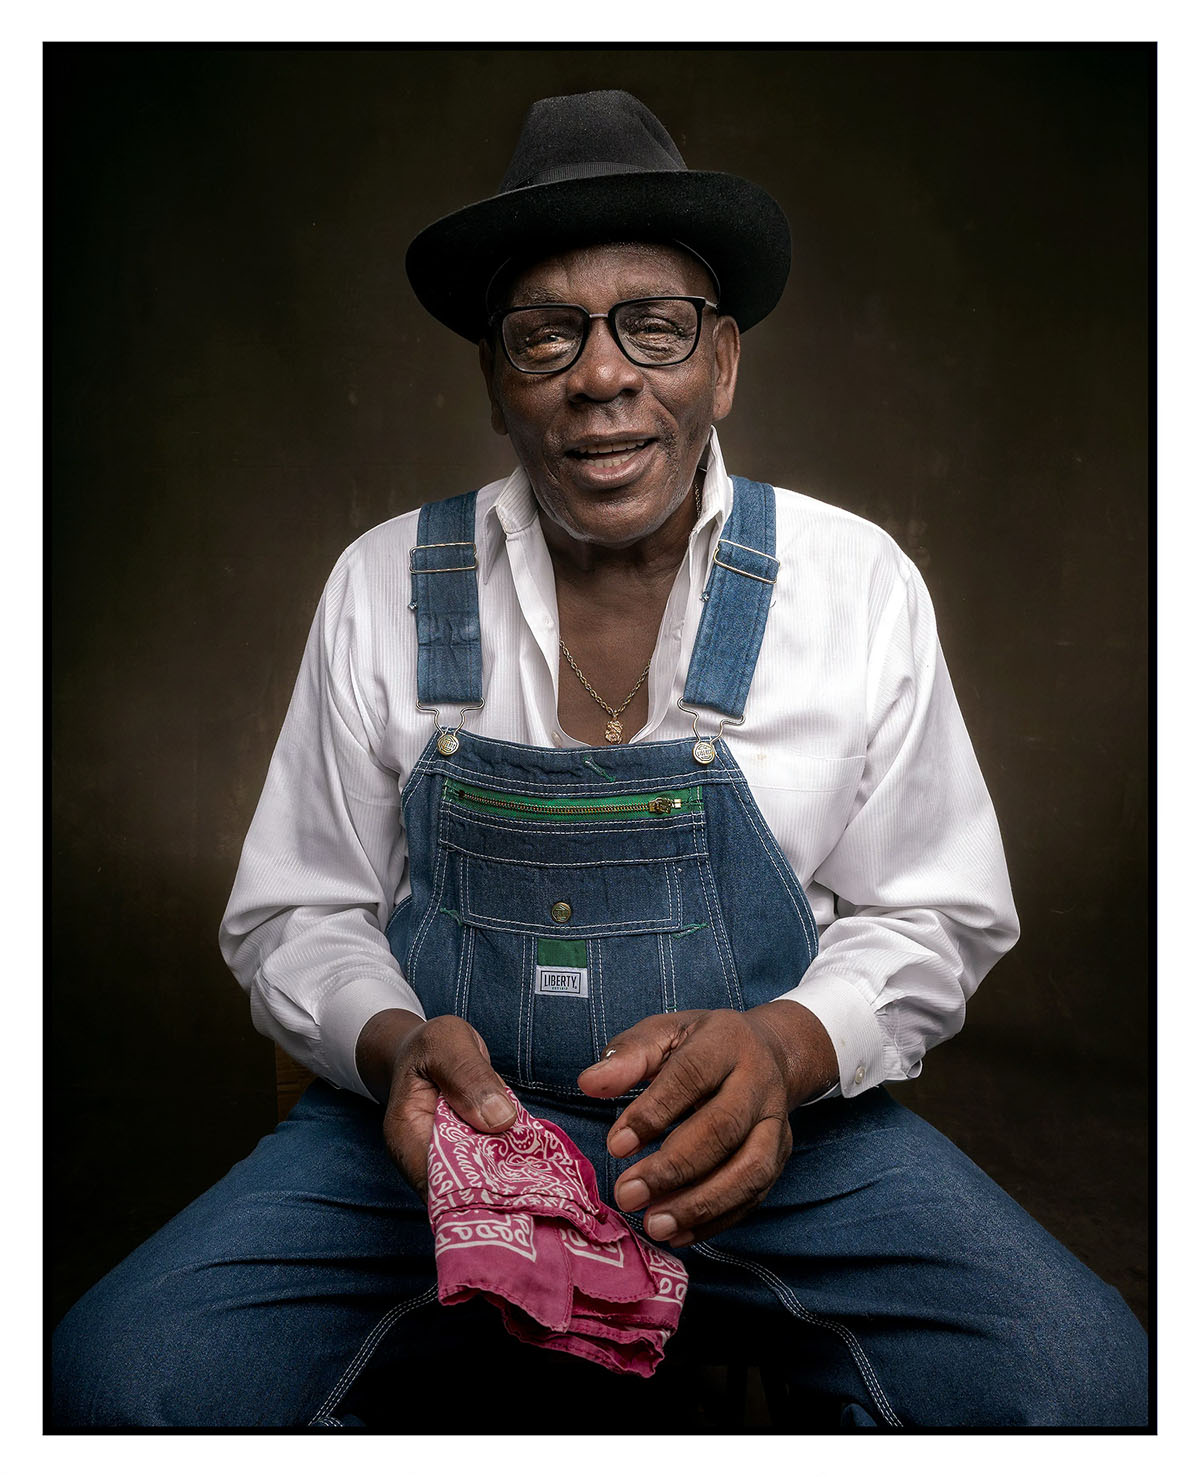 A portrait of a man wearing denim overalls holding a red cloth and wearing a black top hat